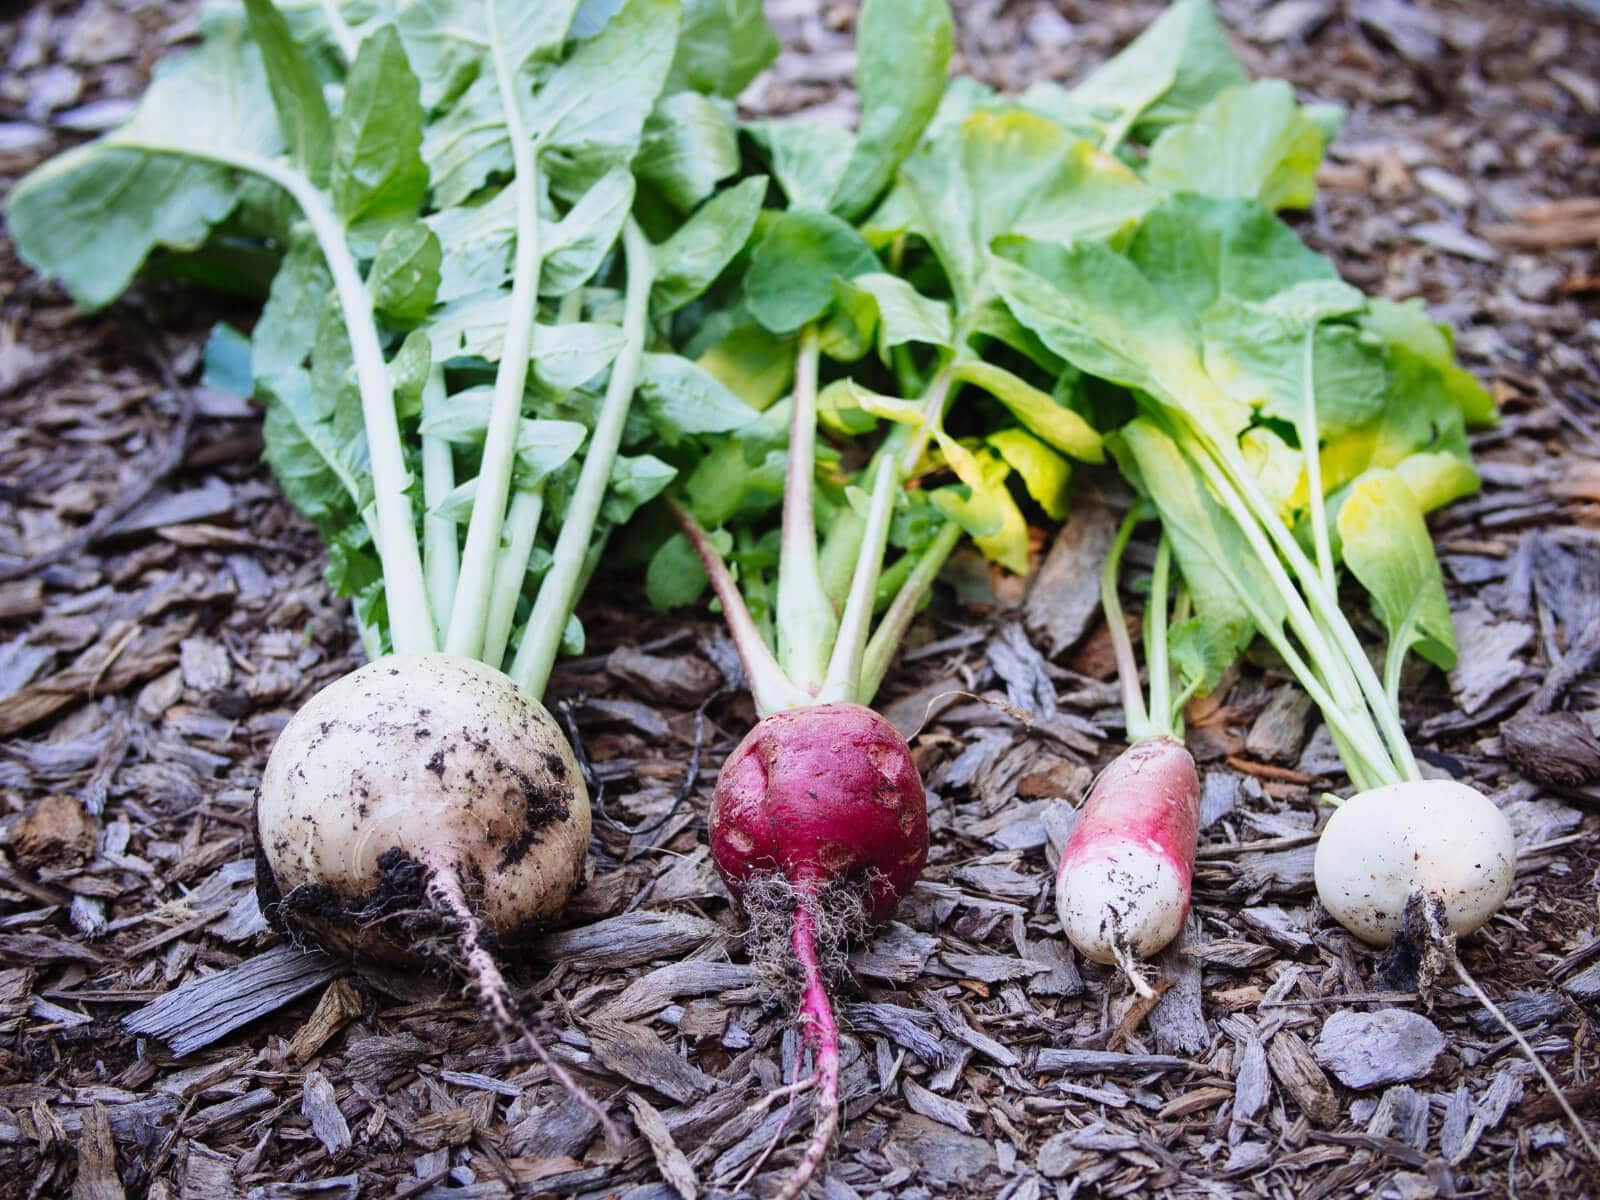 Winter, summer, and spring radishes